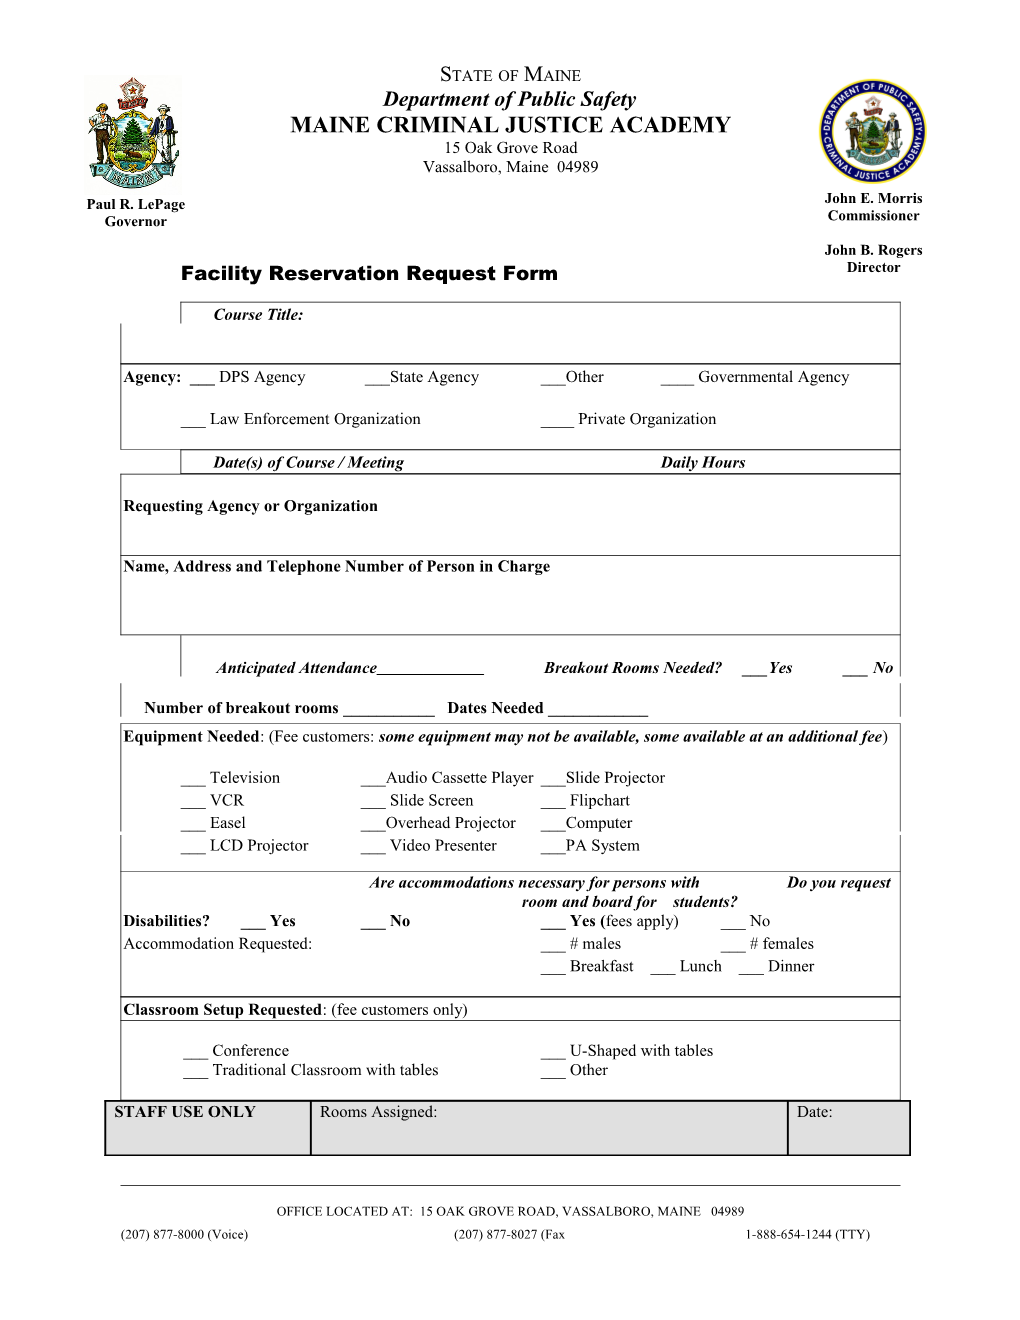 Facility Reservation Request Form